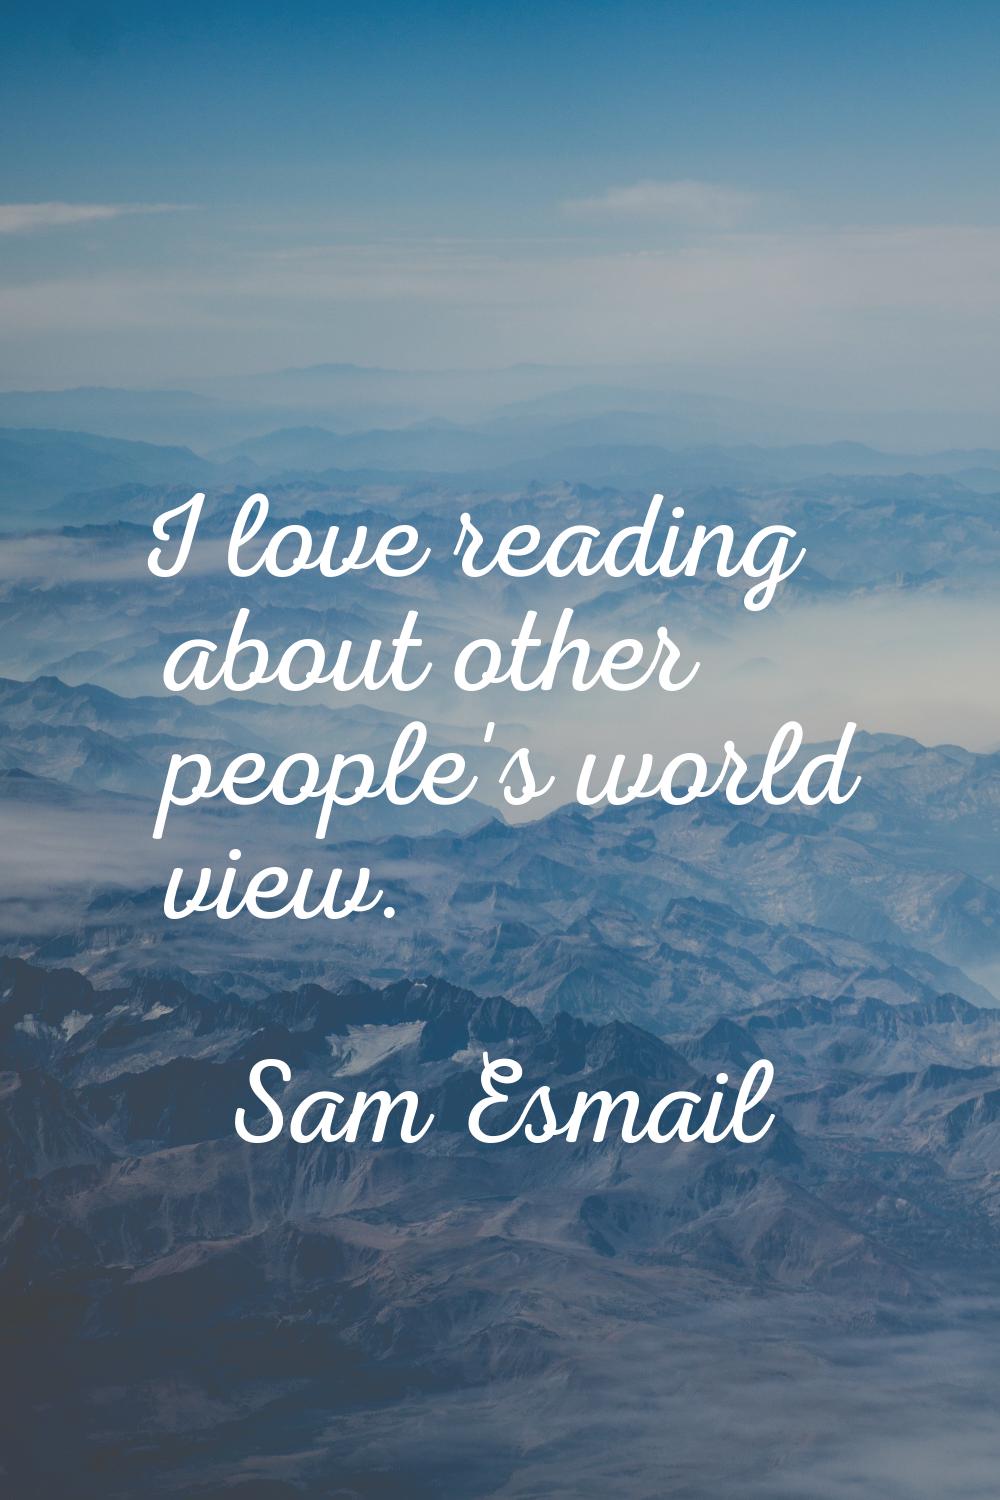 I love reading about other people's world view.